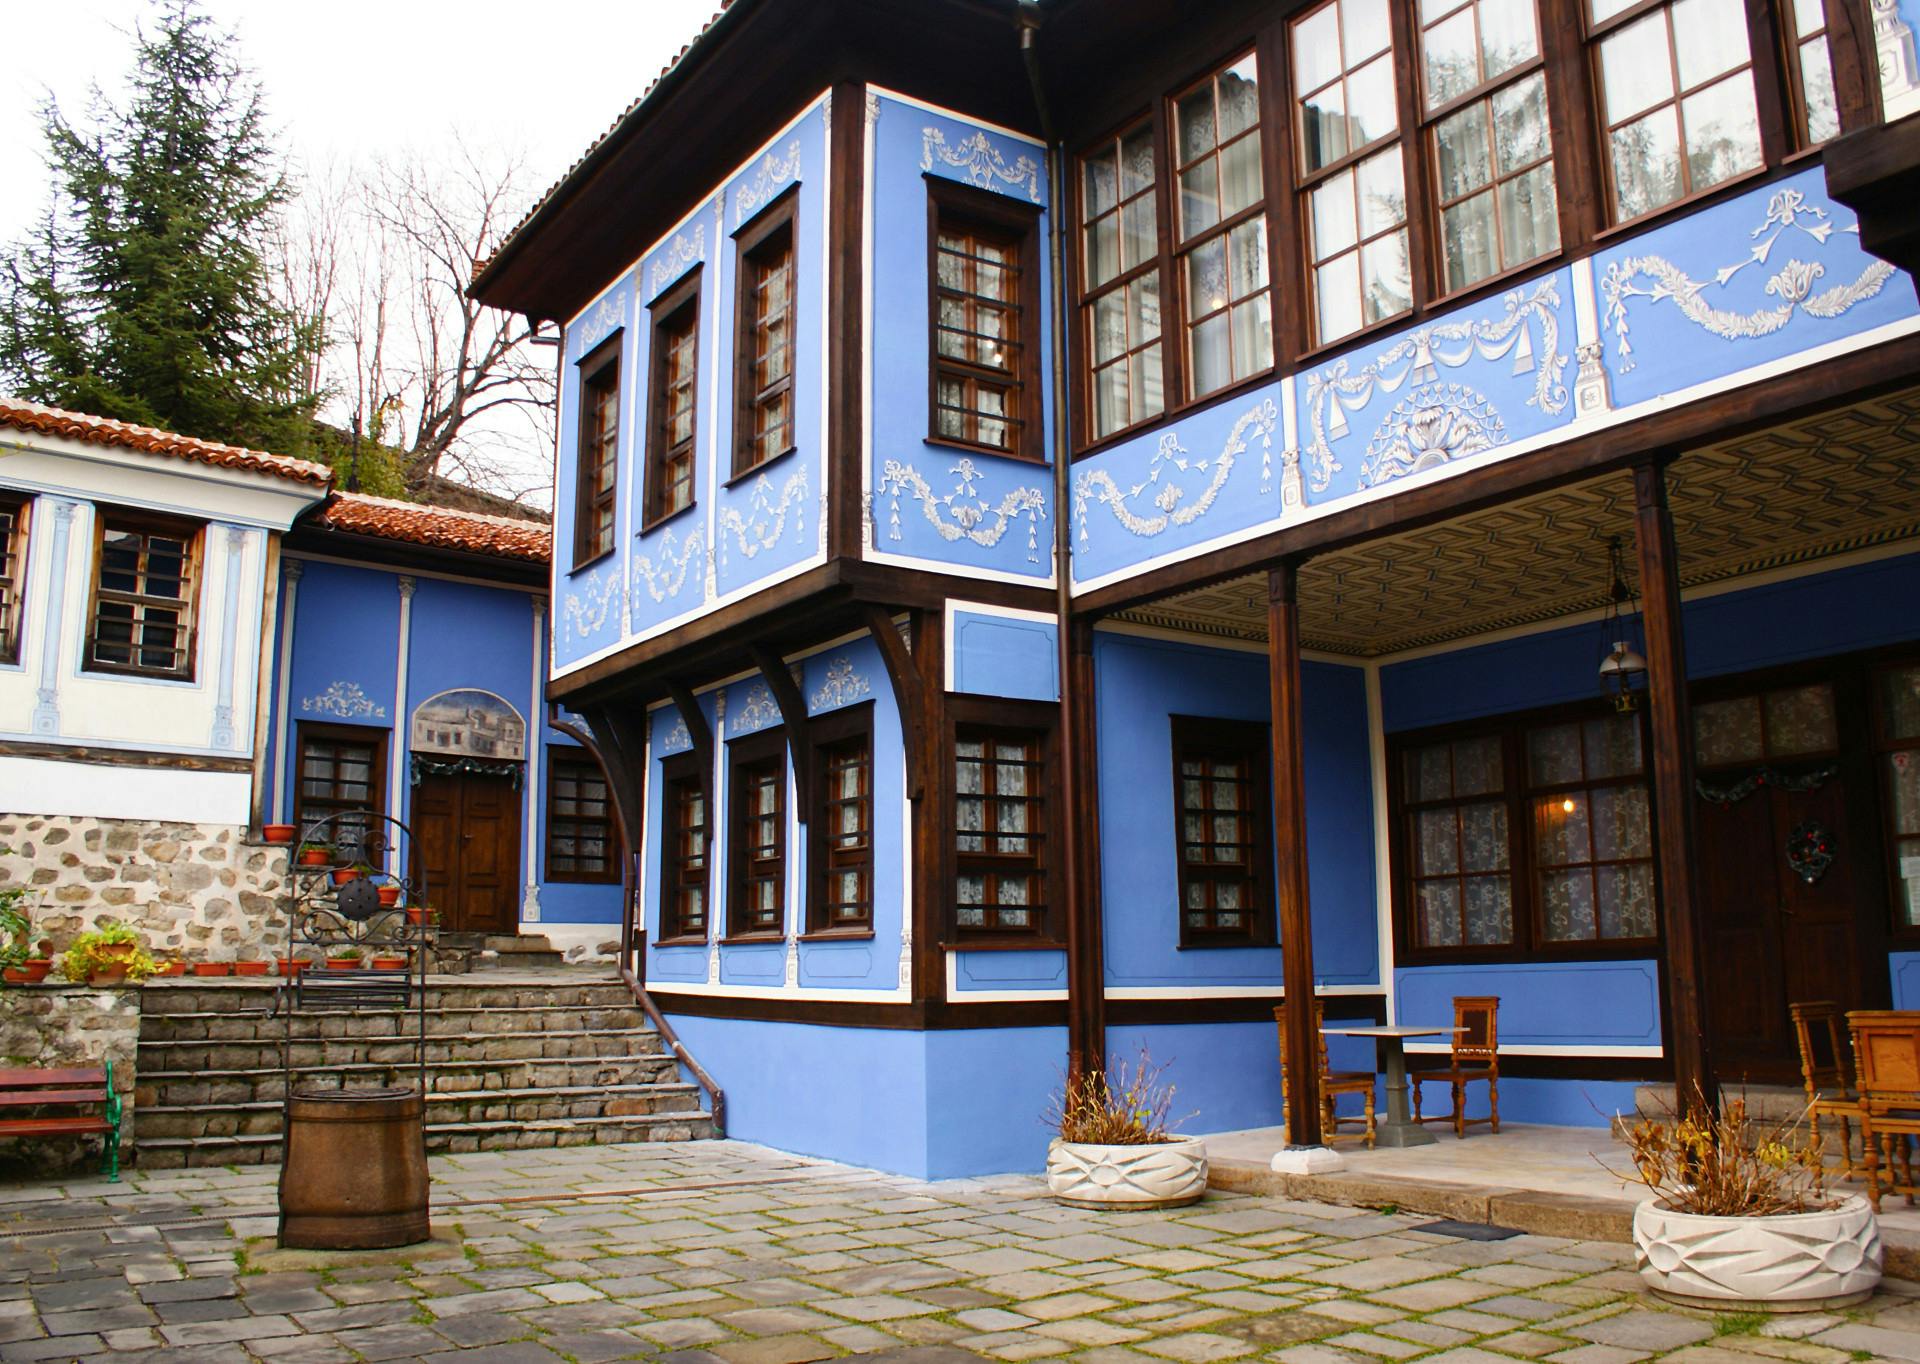 Cultural tour of Plovdiv's Old Town4.jpg